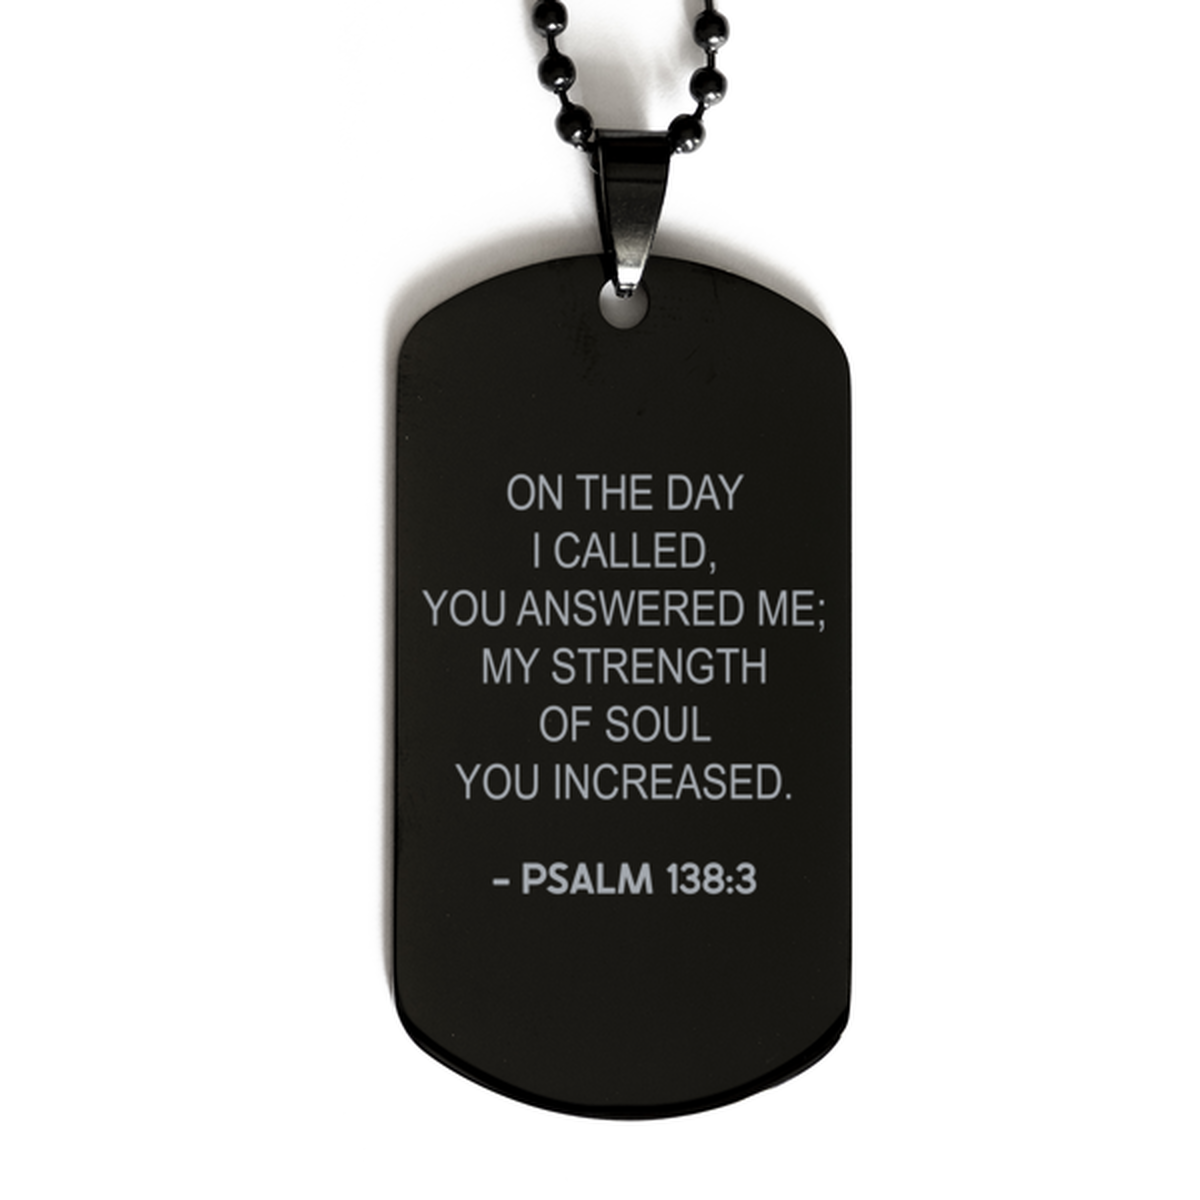 Bible Verse Black Dog Tag, Psalm 138:3 On The Day I Called You Answered Me My Strength, Christian Inspirational Necklace Gifts For Men Women